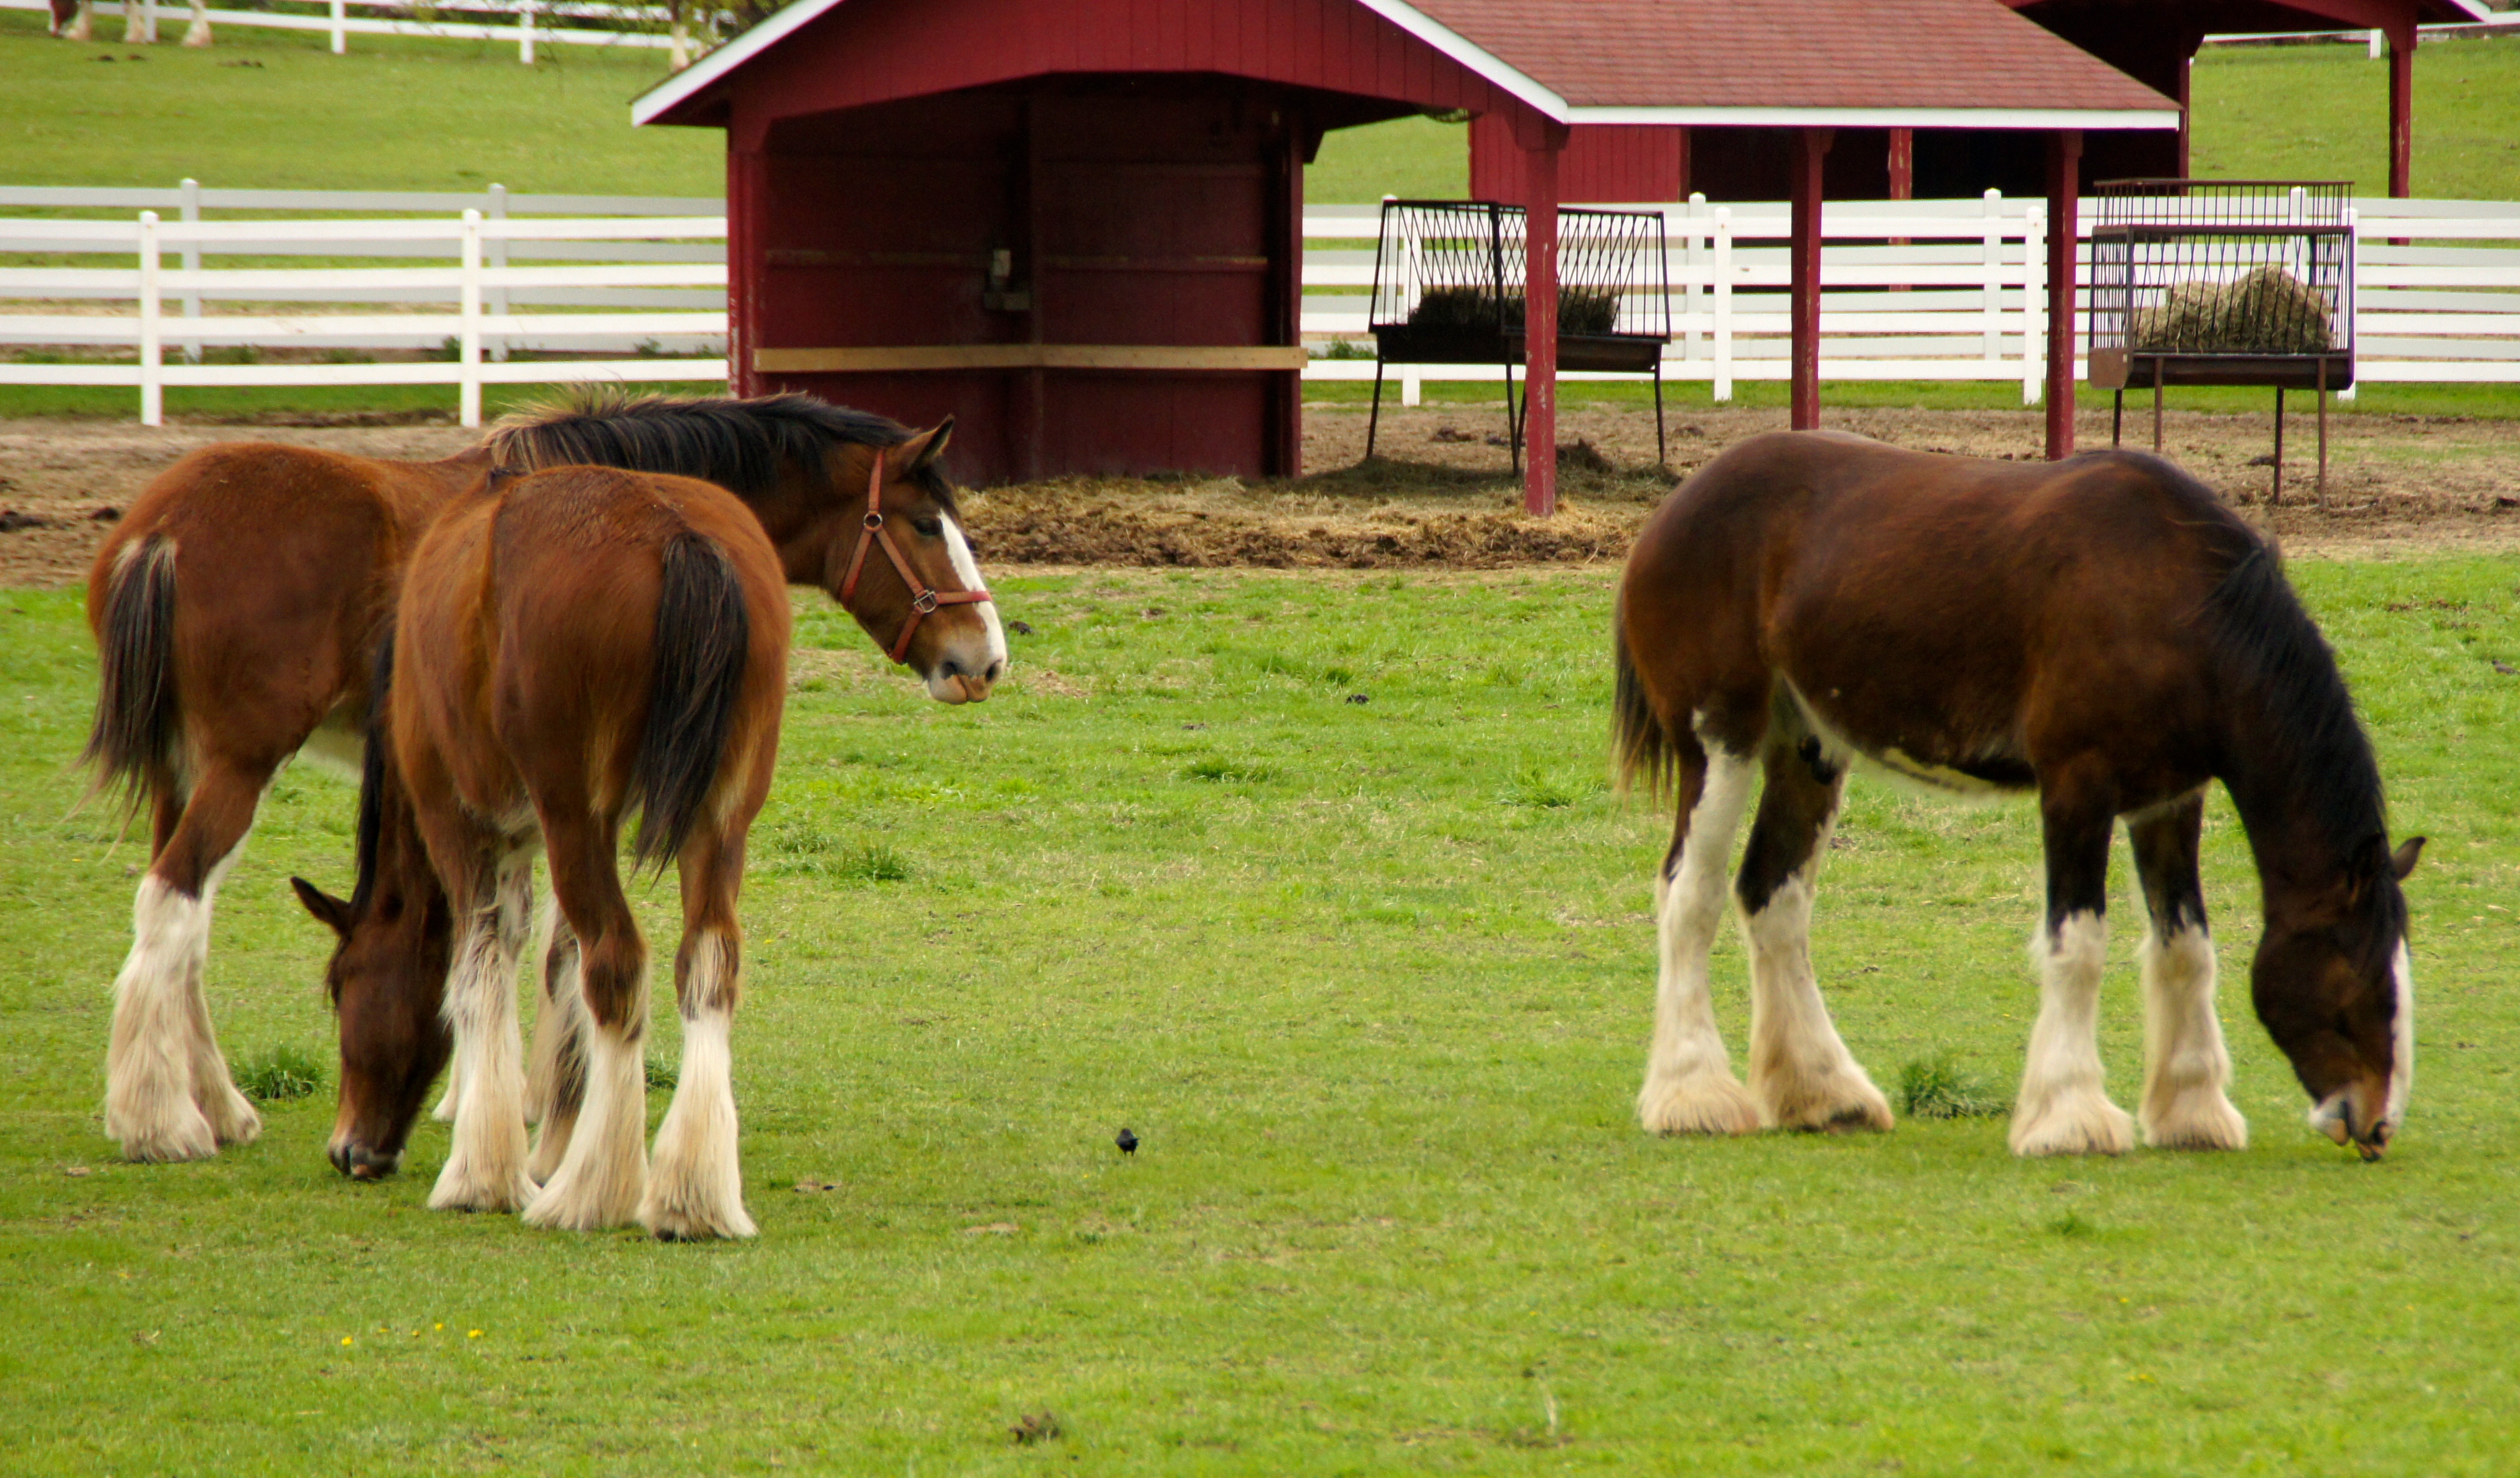 Getting Cozy With Clydesdales in St. Louis | Off The Beaten Page Travel